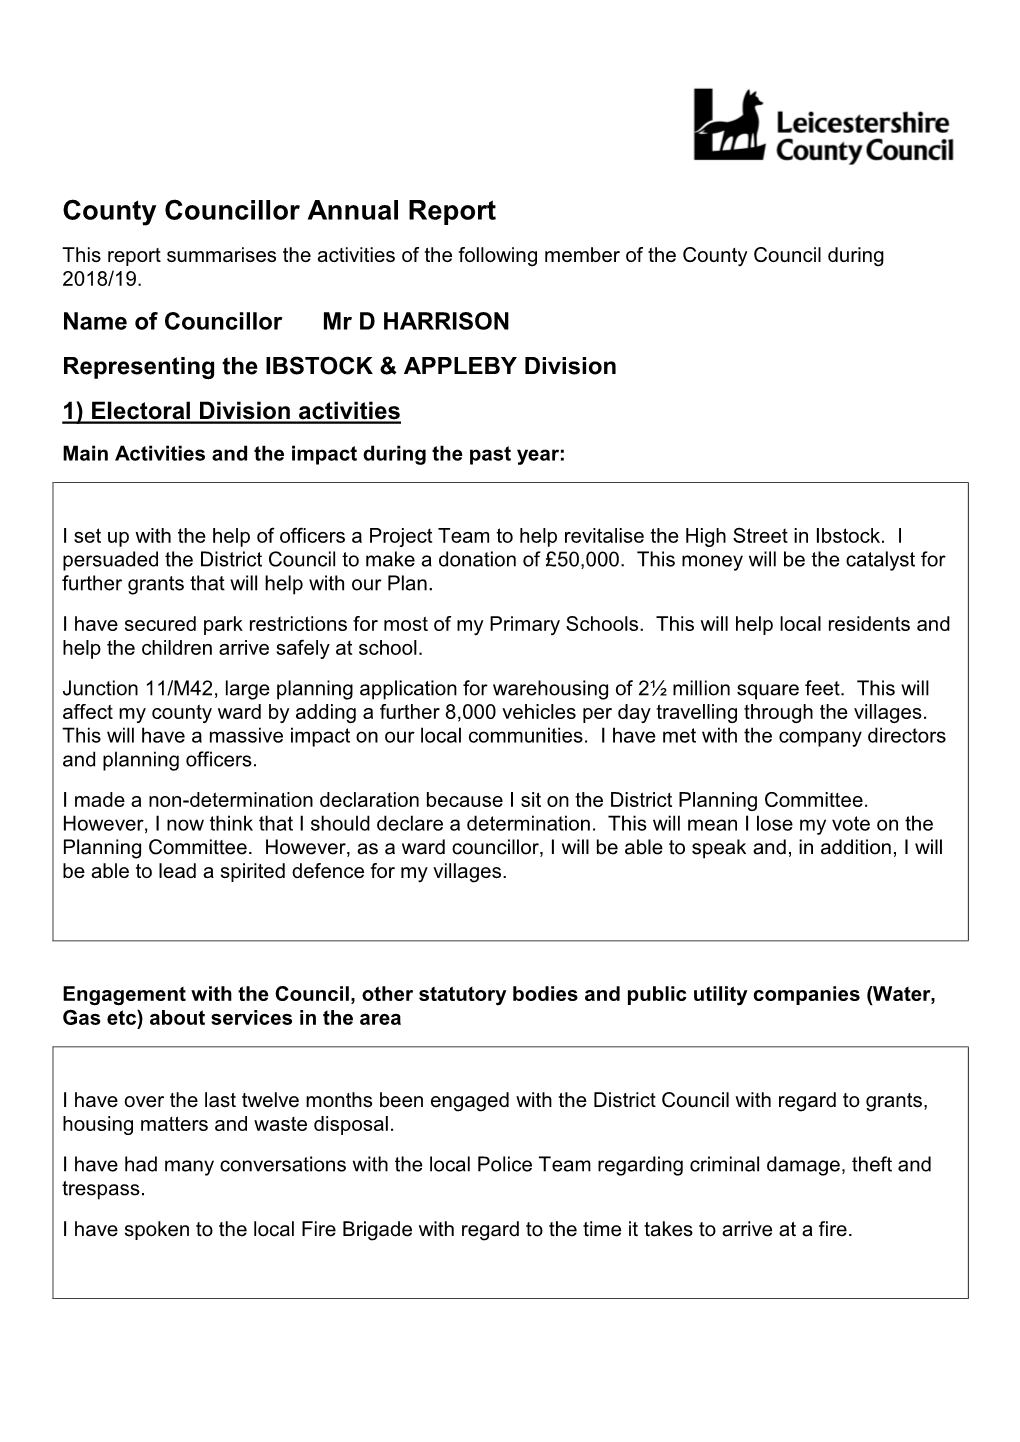 County Councillor Annual Report This Report Summarises the Activities of the Following Member of the County Council During 2018/19